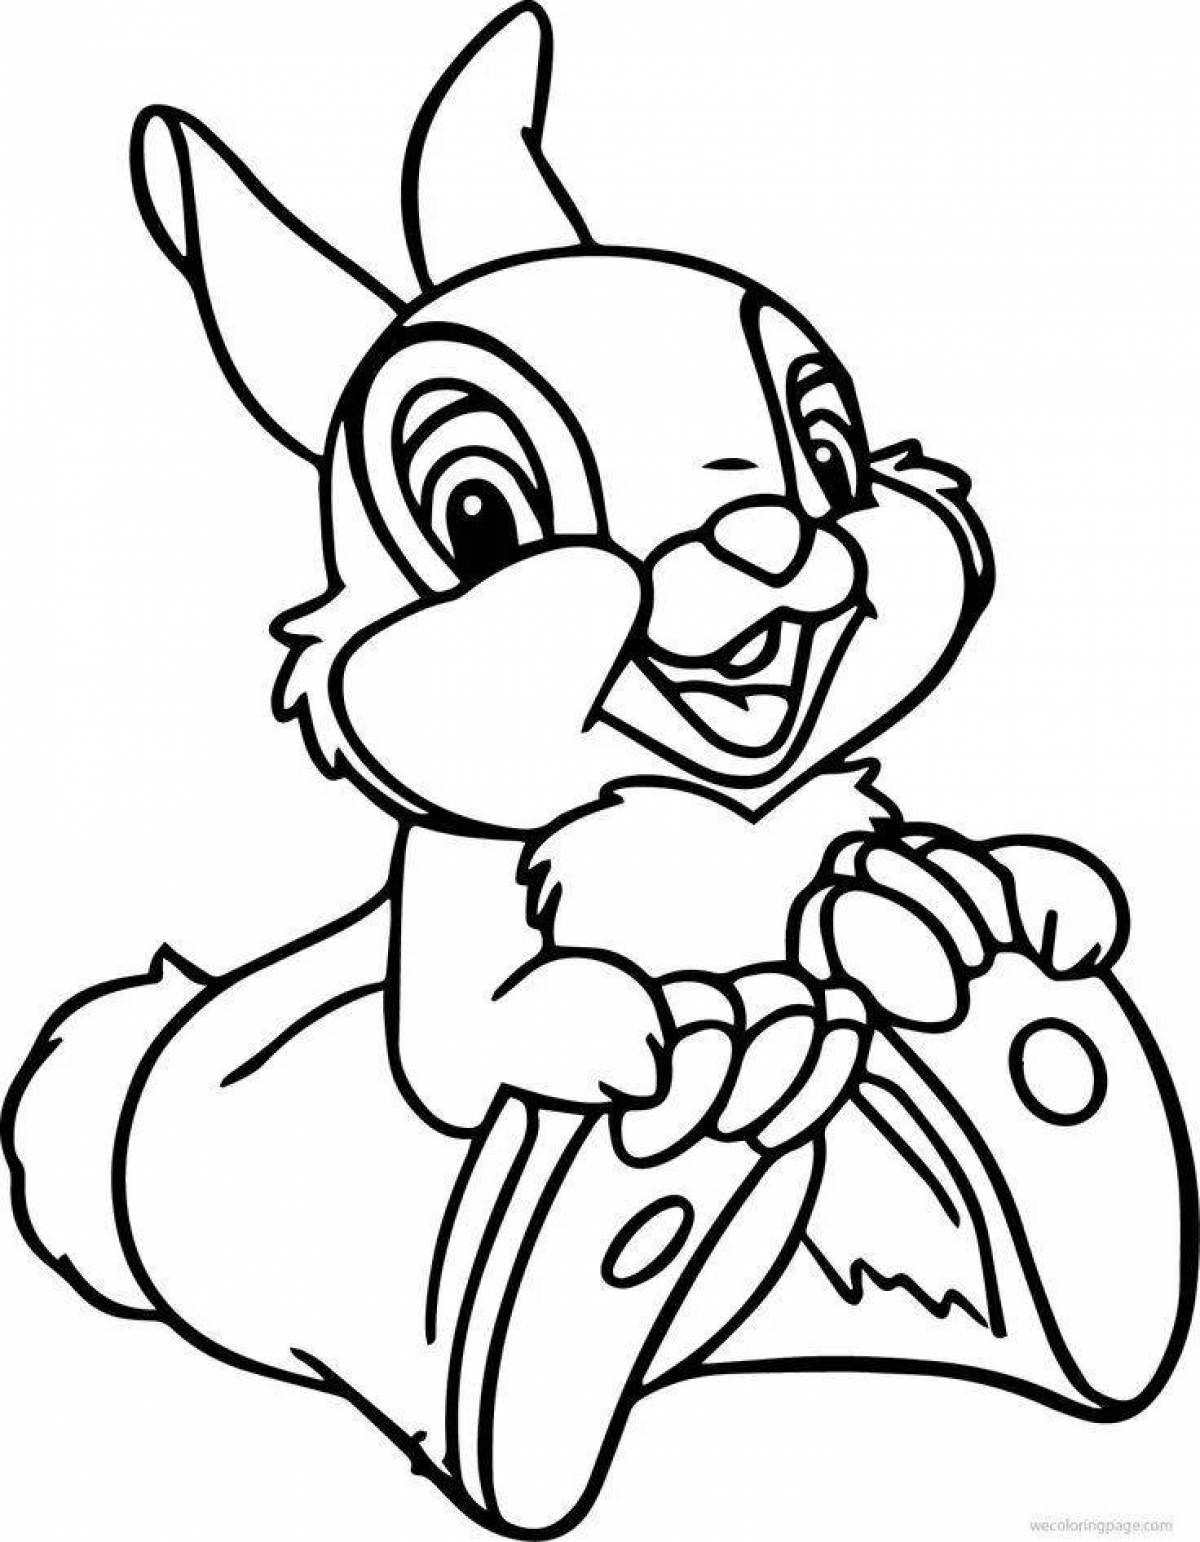 Coloring book cheerful year of the hare